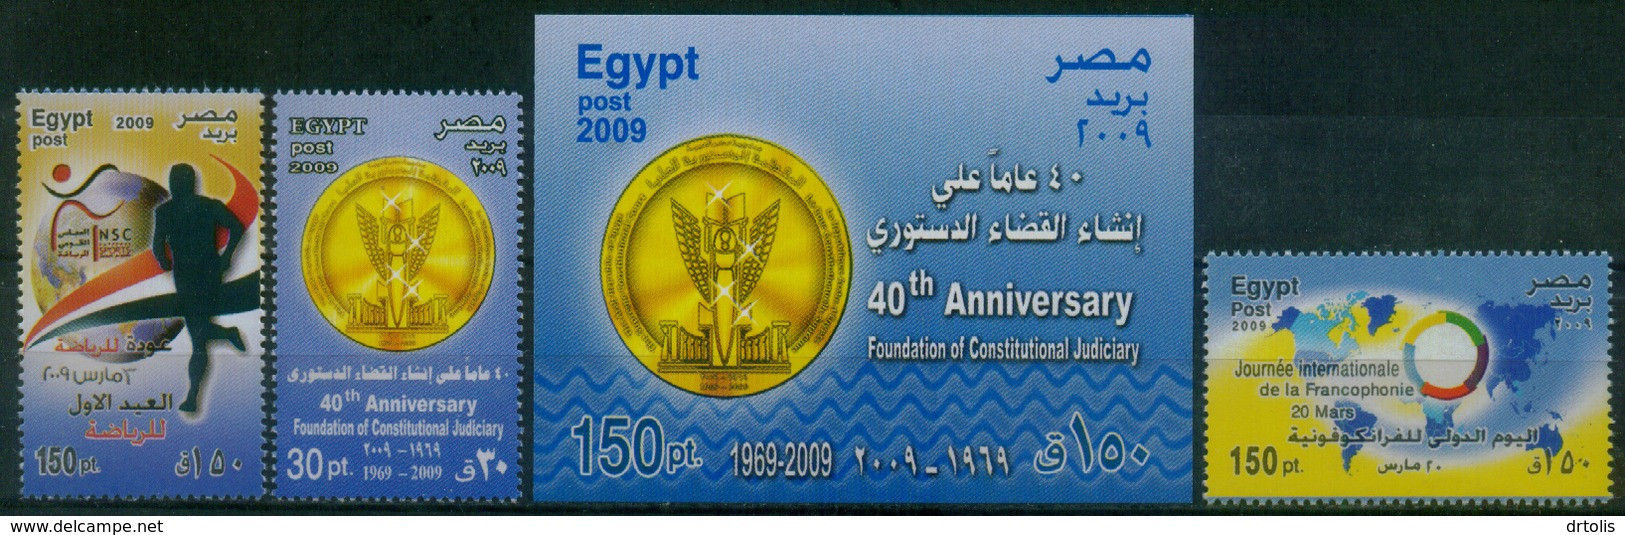 EGYPT / 2009 / COMPLETE YEAR ISSUES / MNH / VF / 7 SCANS . - Nuovi